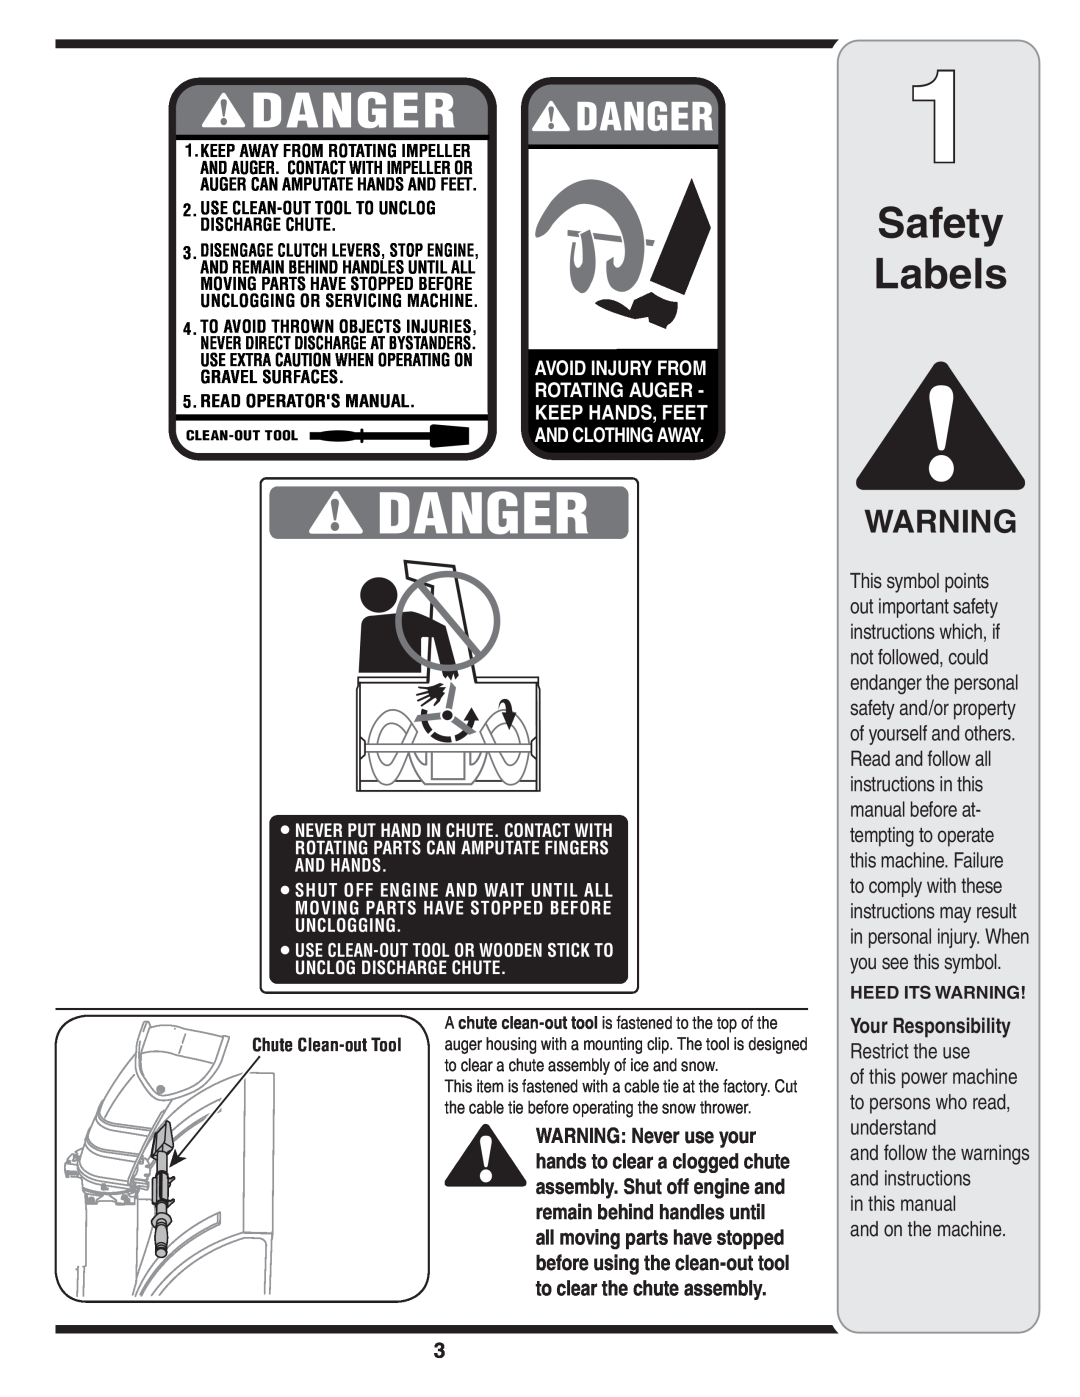 MTD 769-01275C Safety Labels, Restrict the use, in this manual and on the machine, Your Responsibility, Heed Its Warning 